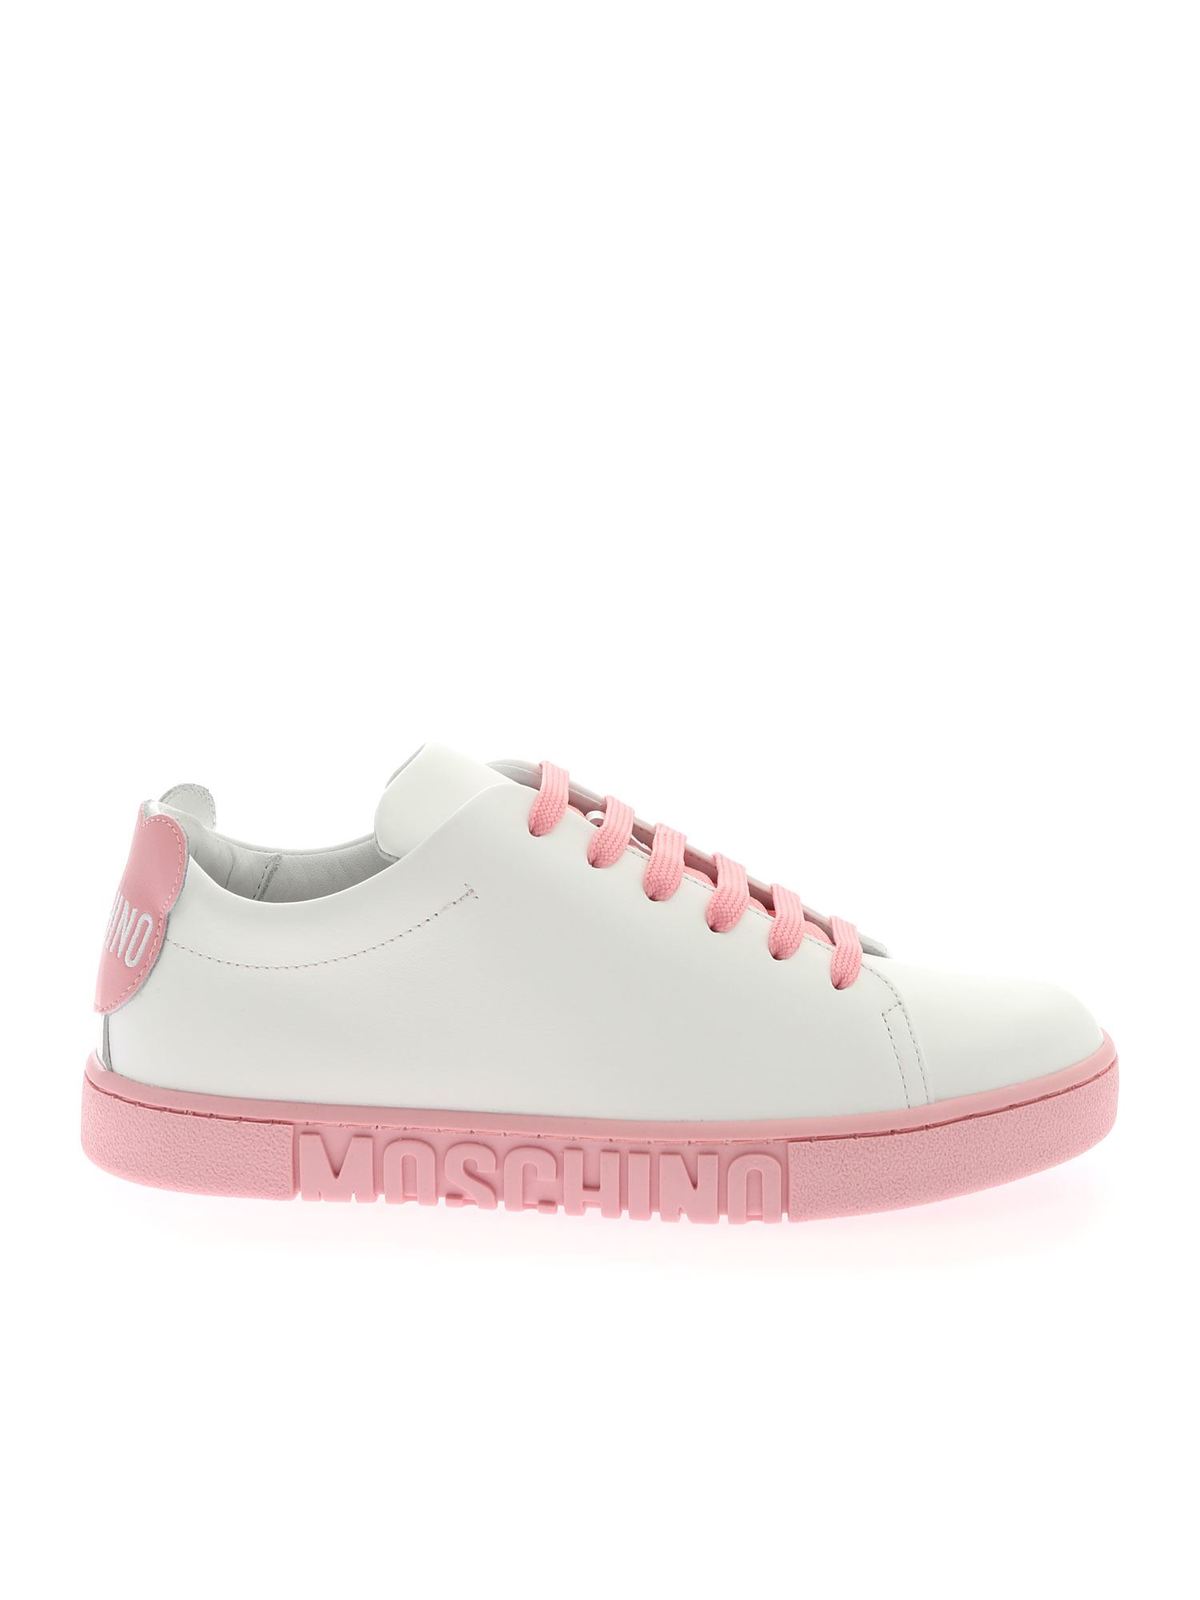 MOSCHINO TEDDY PATCH SNEAKERS IN WHITE AND PINK